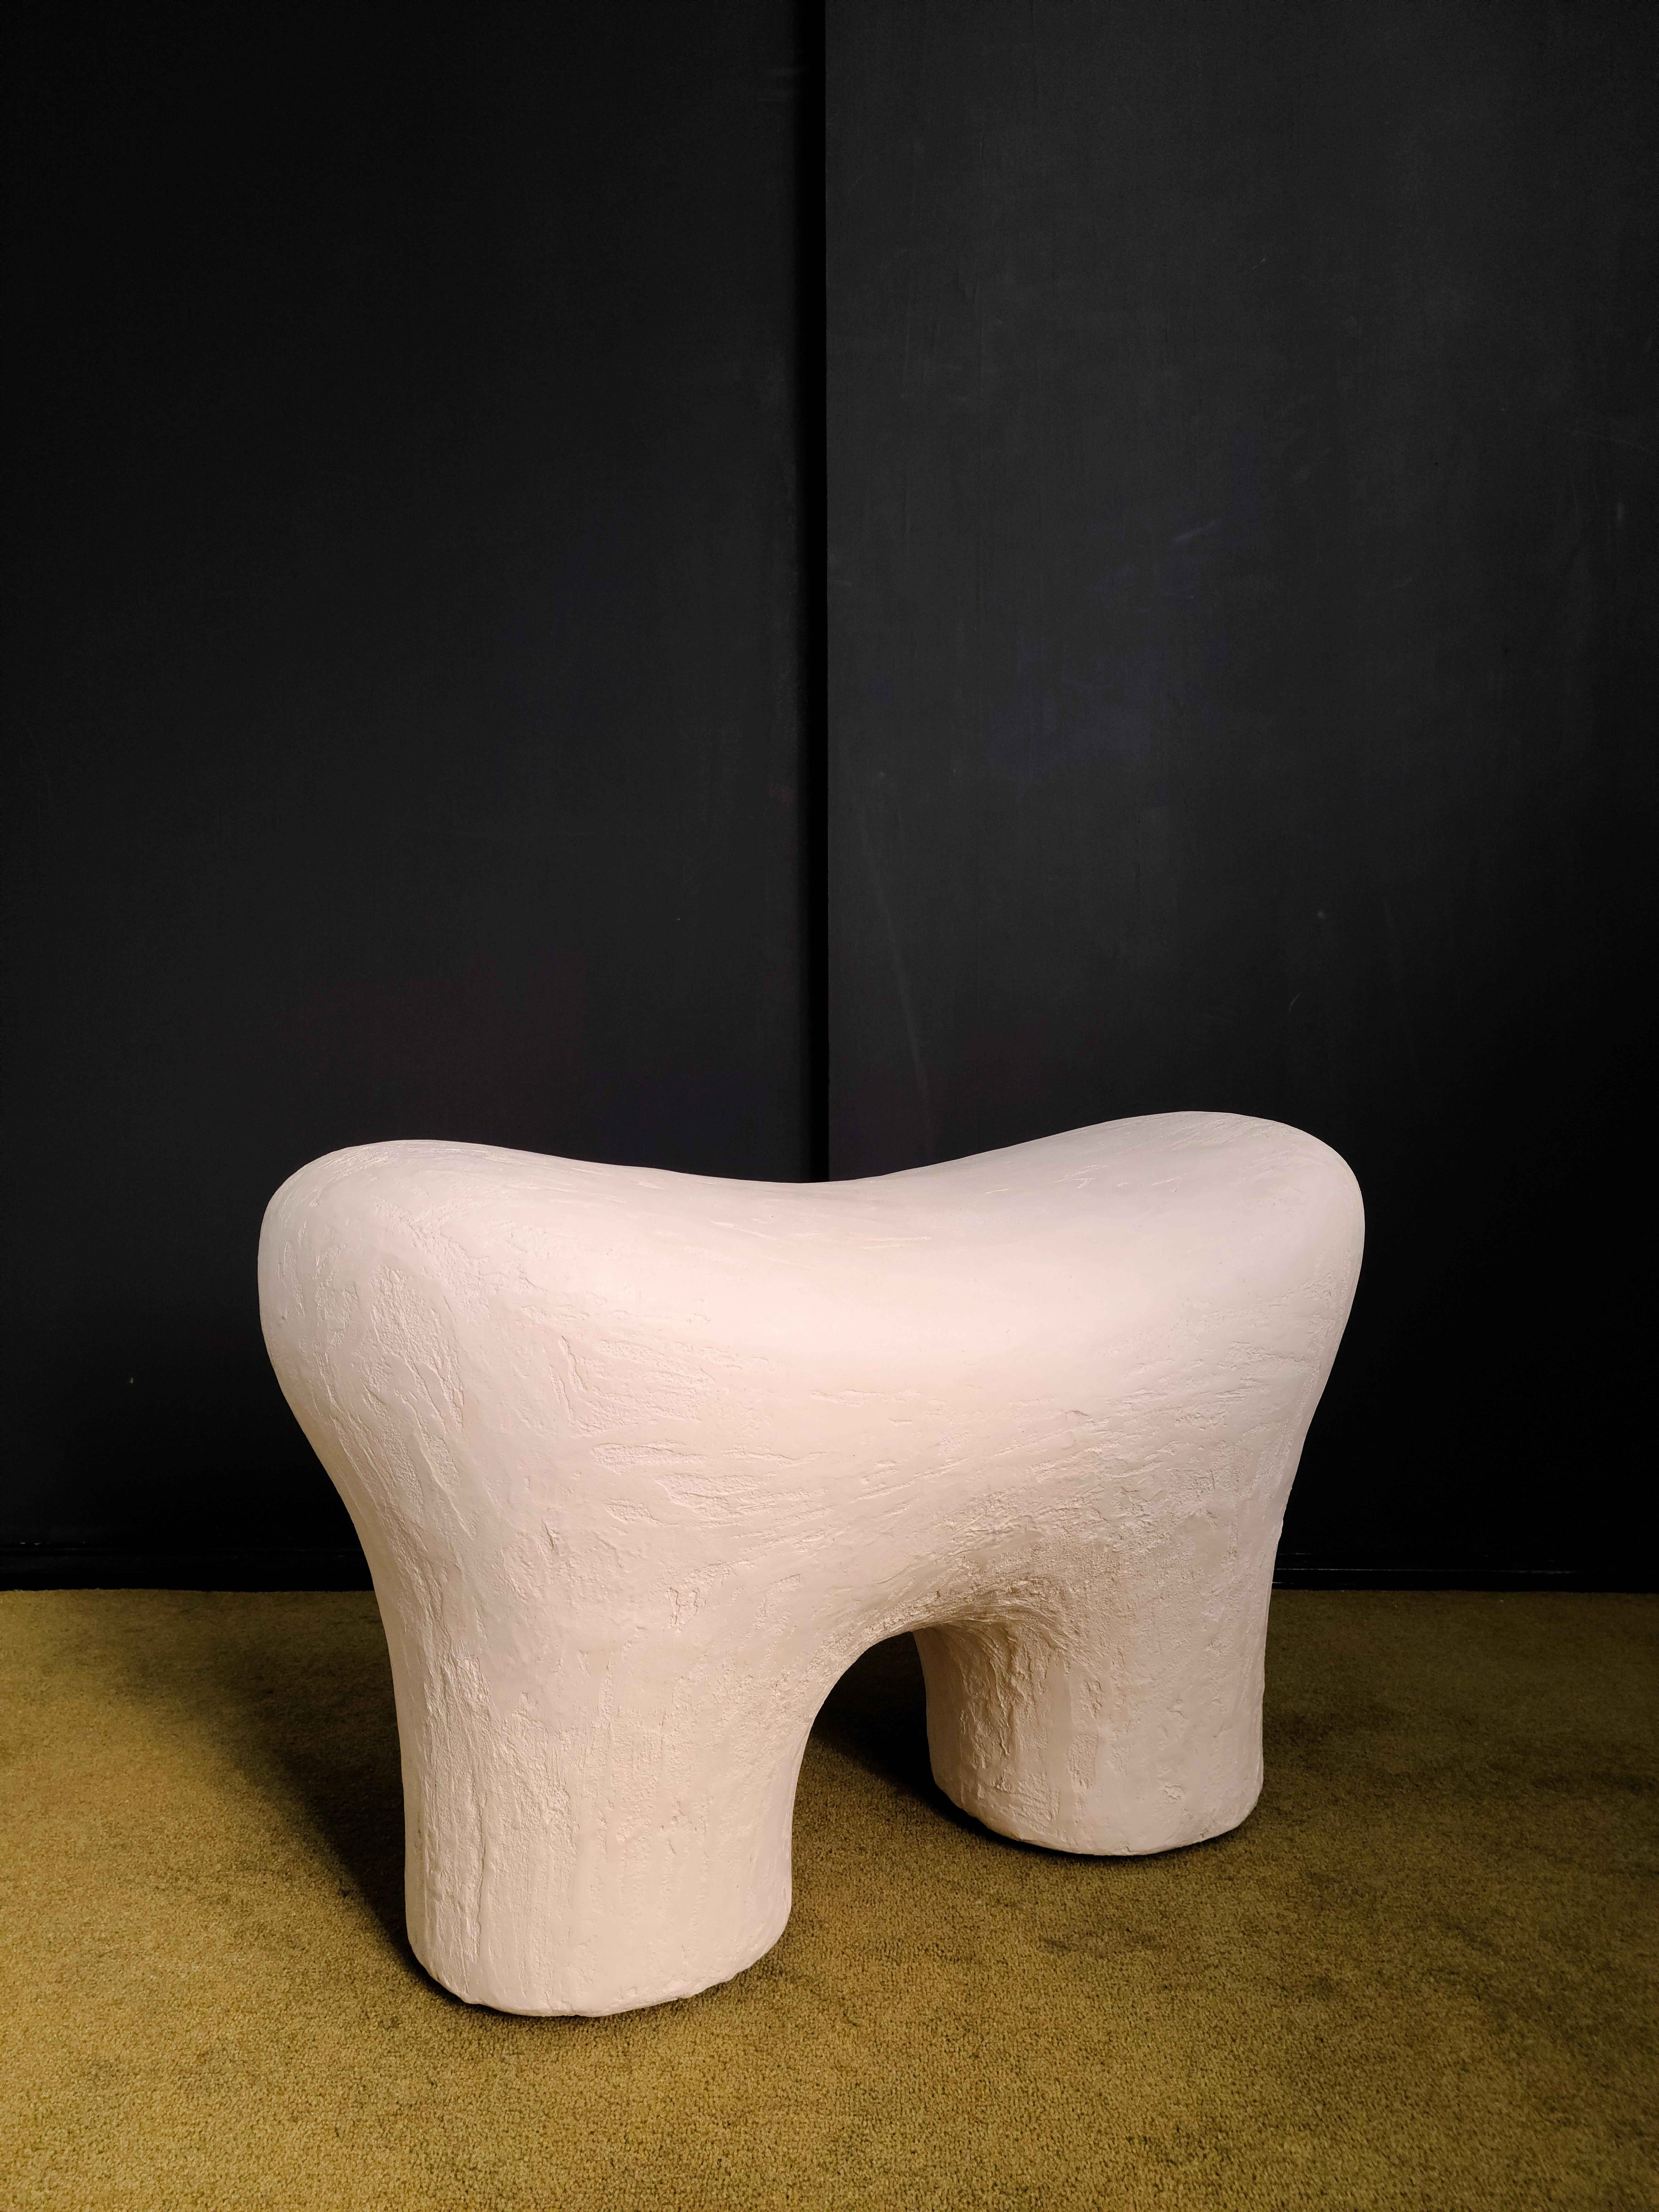 White tooth chair by Dongwook Choi
Dimensions: 70 x 37 x 45 cm
Materials: EPS, plaster

It is a chair made with the motif of tooth shape. After the urethane painting to add hardness to the EPS carved through 3D modeling, I wanted to express the